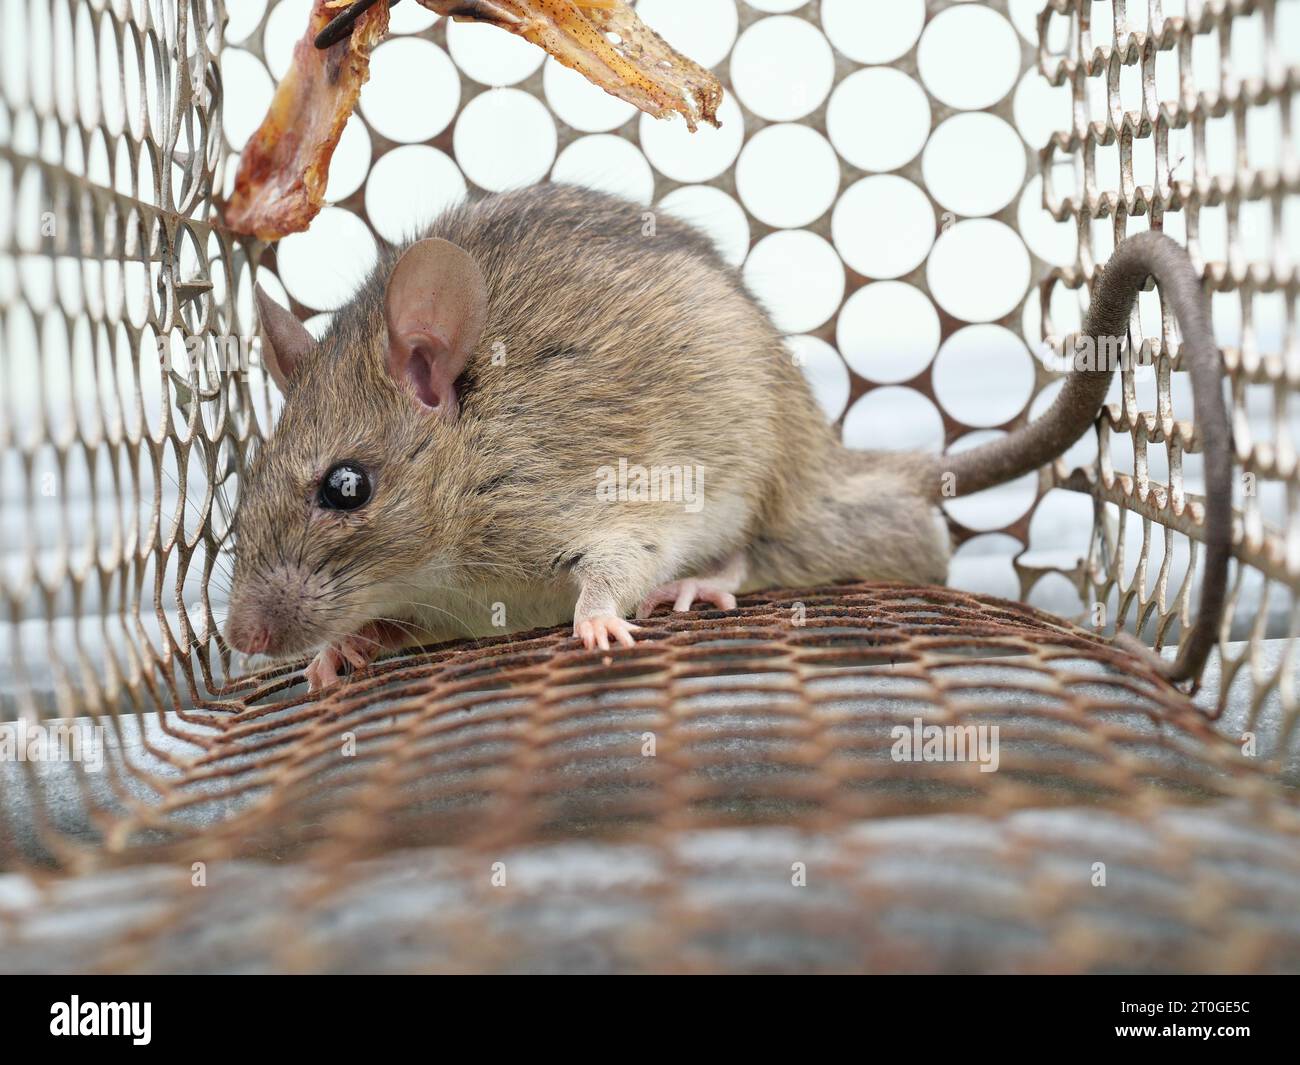 Rat in cage mousetrap on white background, Mouse finding a way out of being confined, Trapping and removal of rodents Stock Photo